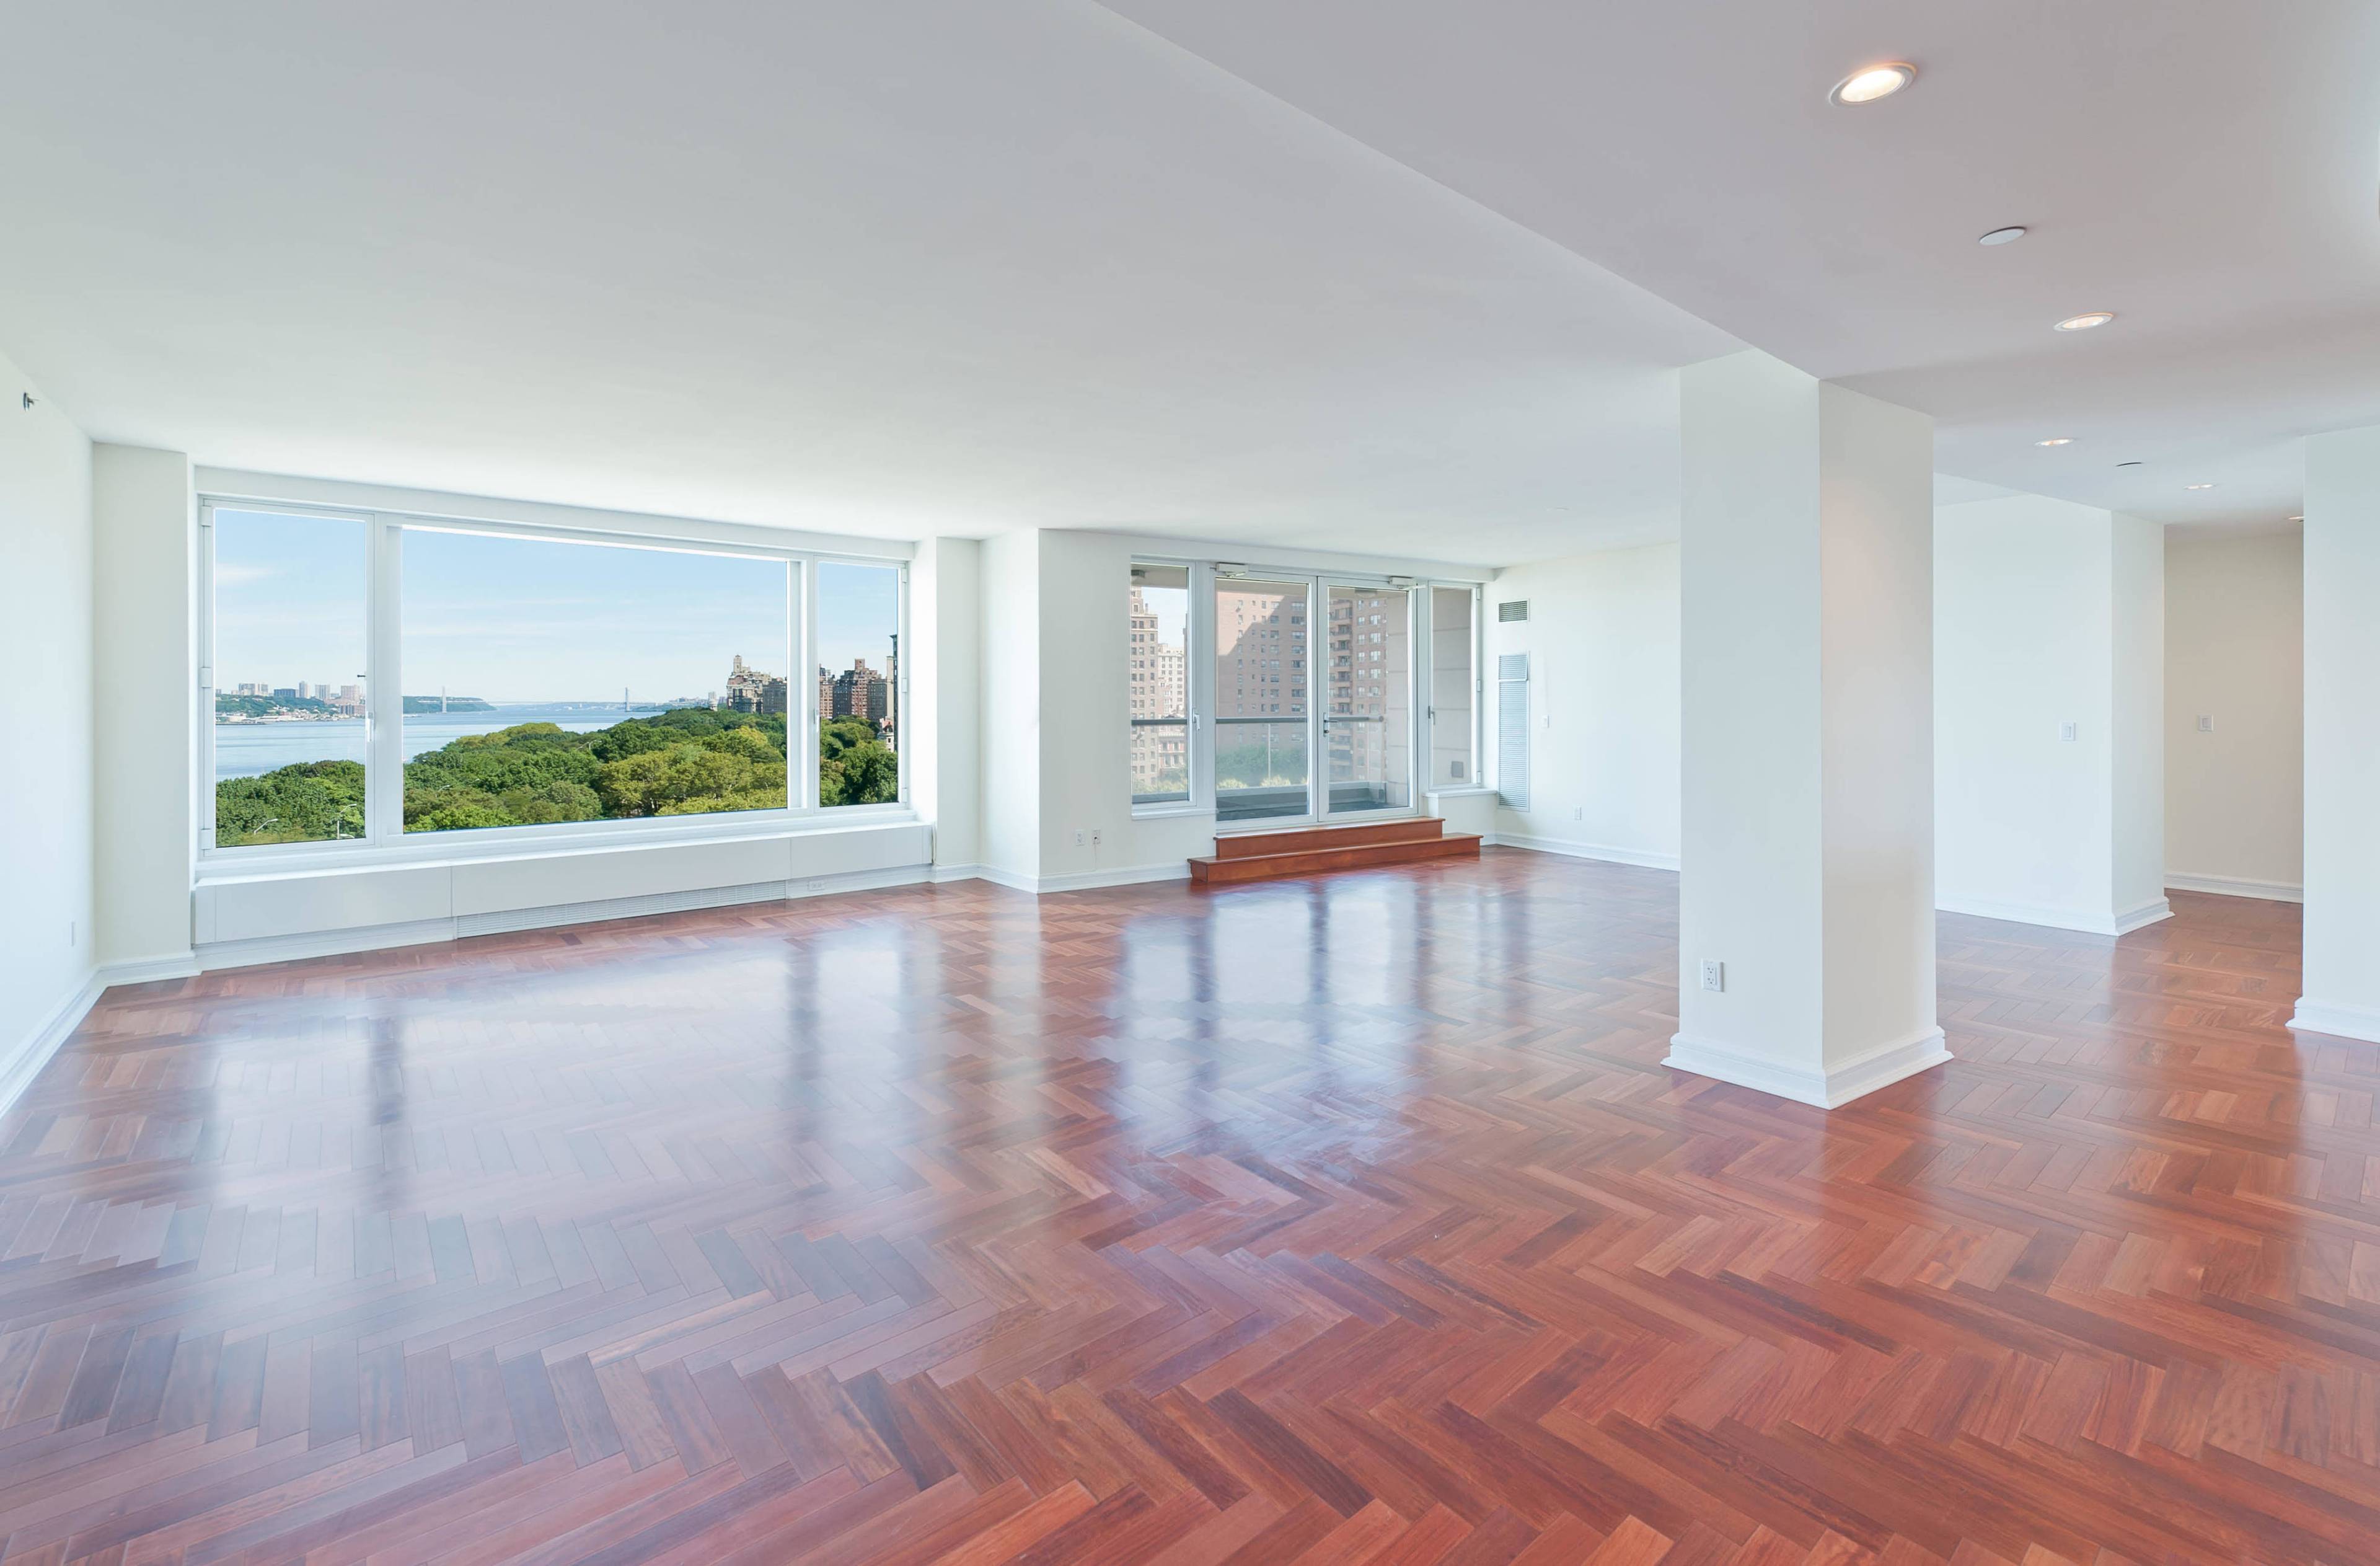 The premier A Line residence in the building comes with breathtaking, forever unobstructed views of the Hudson River, Riverside Park, George Washington Bridge, and many beautiful landmarked buildings along Riverside ...